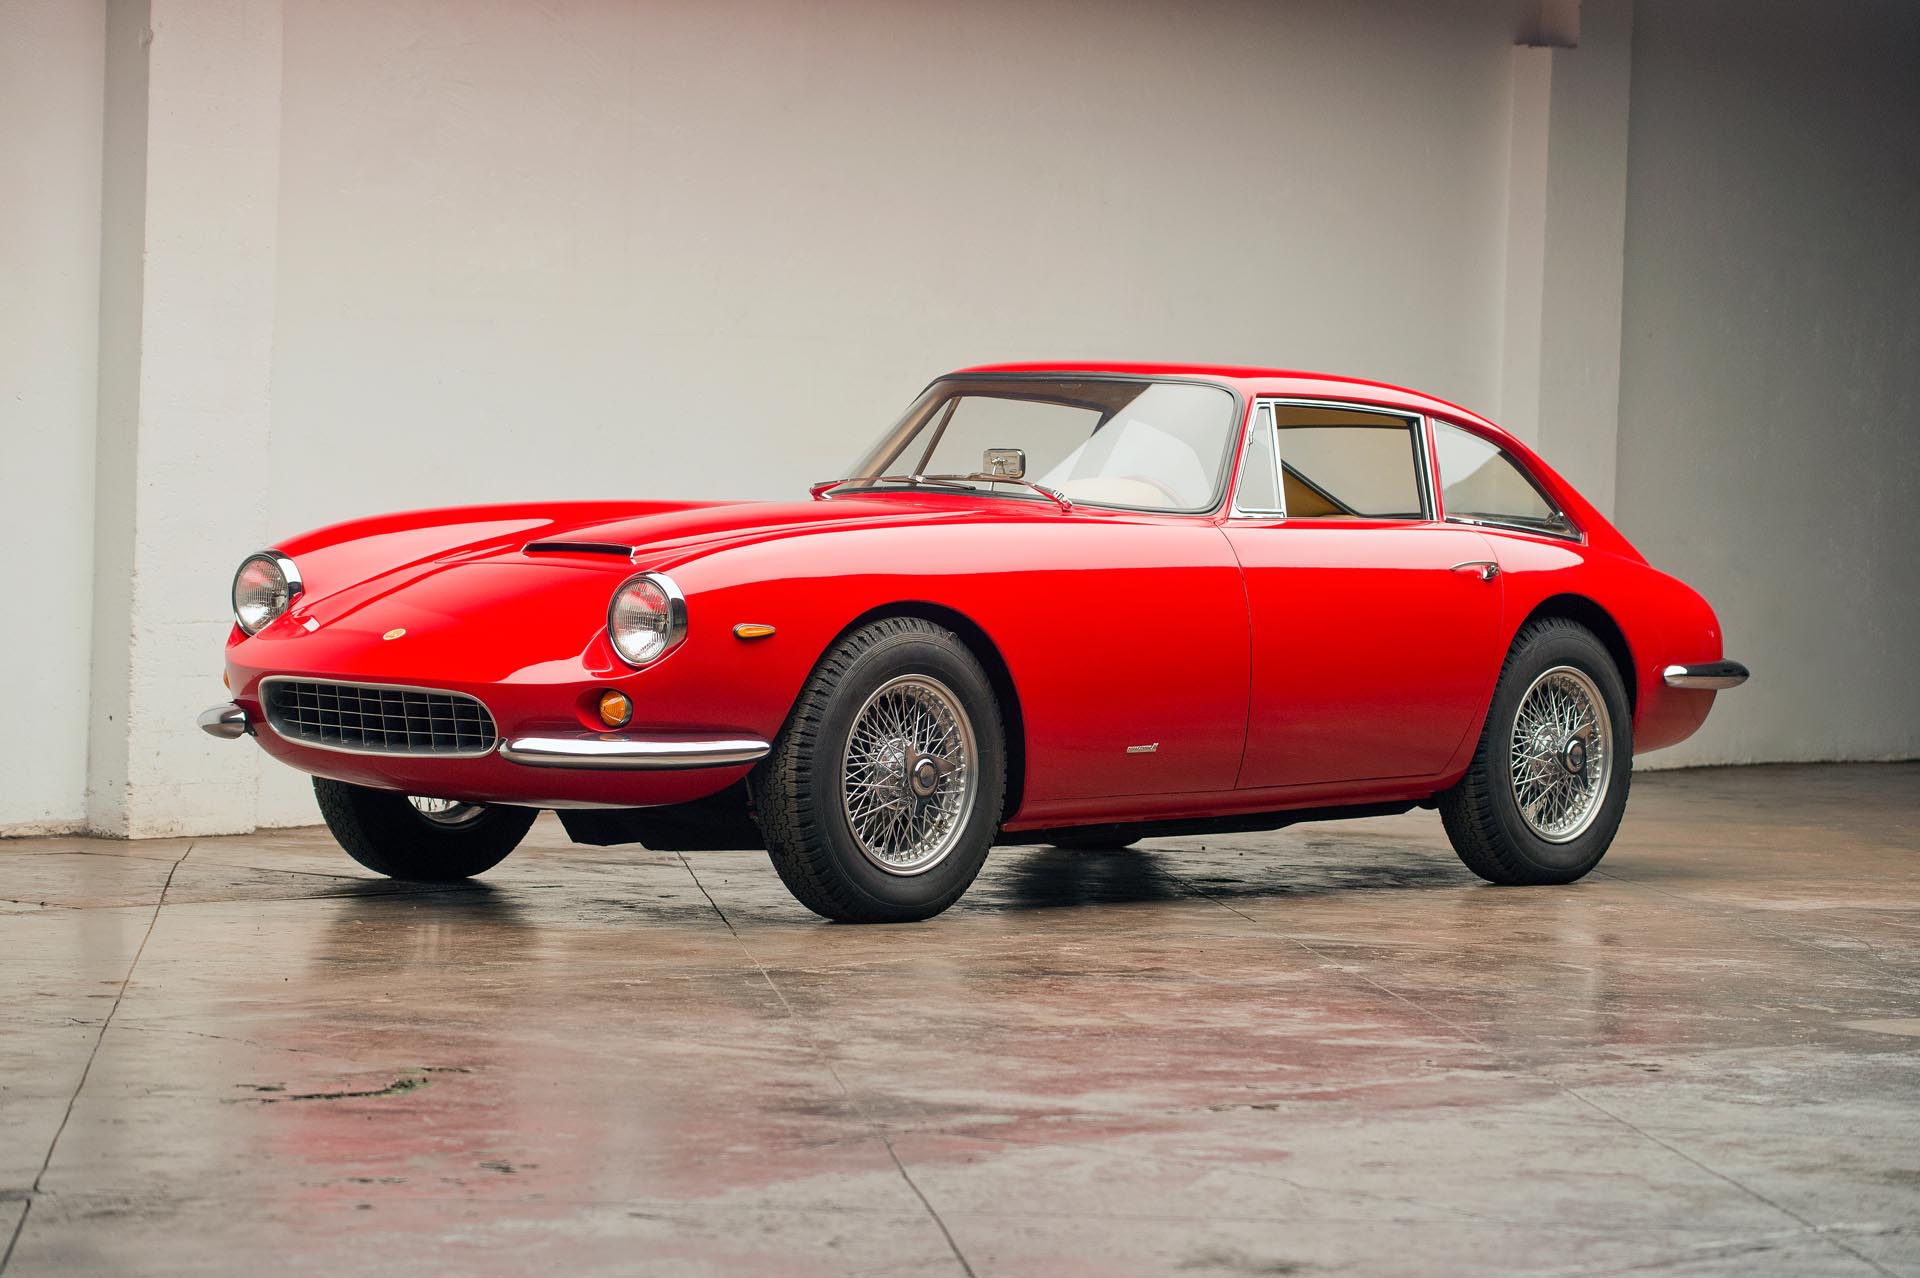 Anamera: First Apollo GT Coupe / Spider Ever to Feature at Worldwide’s Corpus Christi Auction